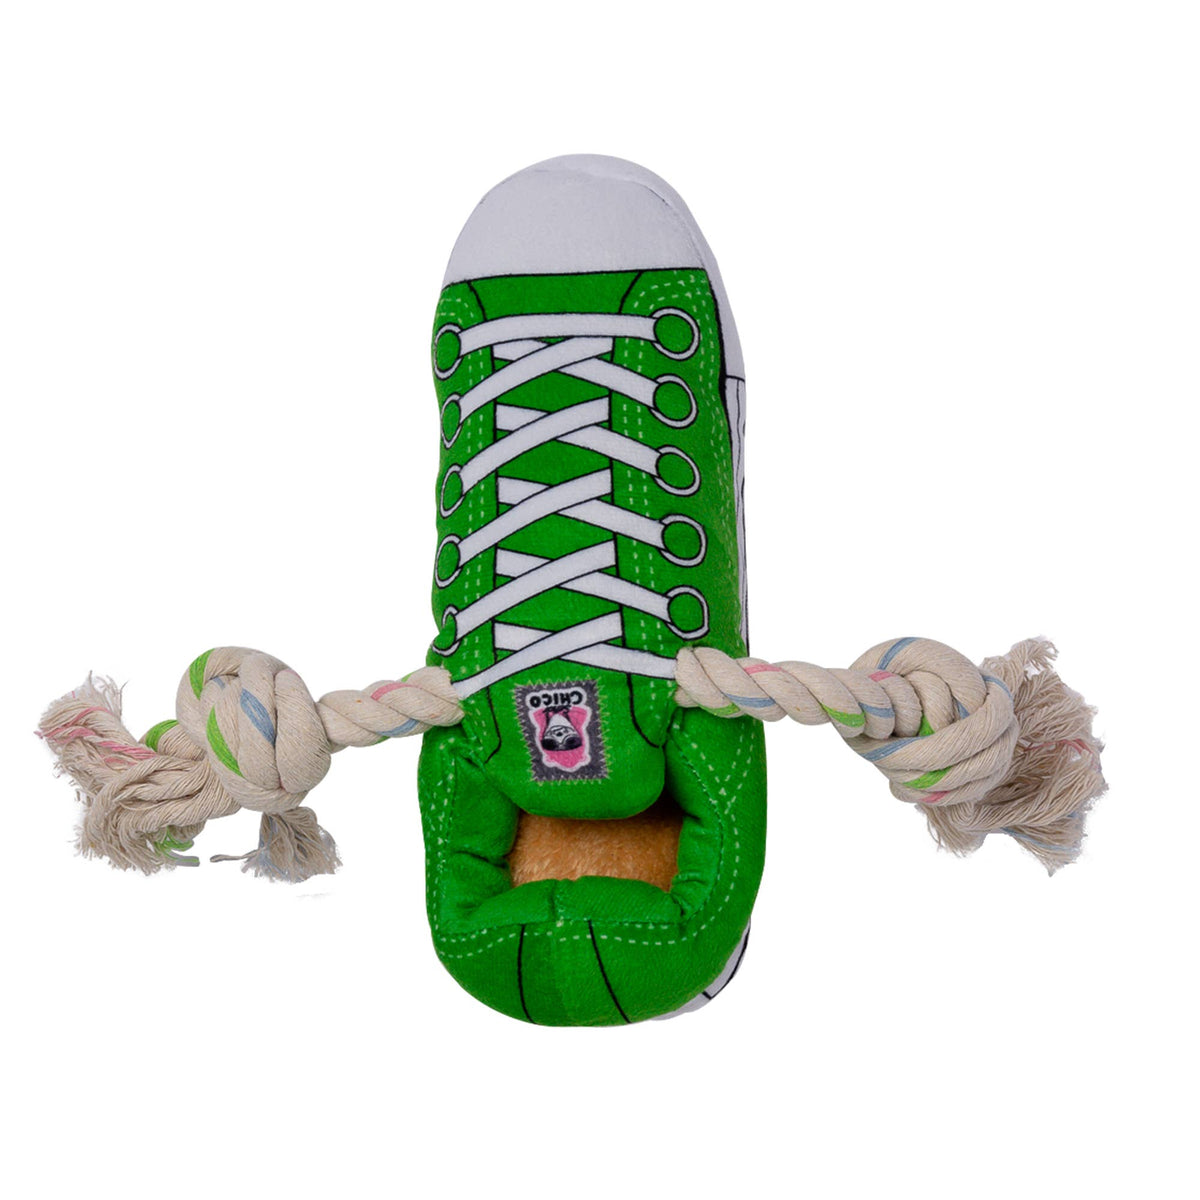 Squeaking Comfort Plush Sneaker Dog Toy - Green by American Pet Supplies